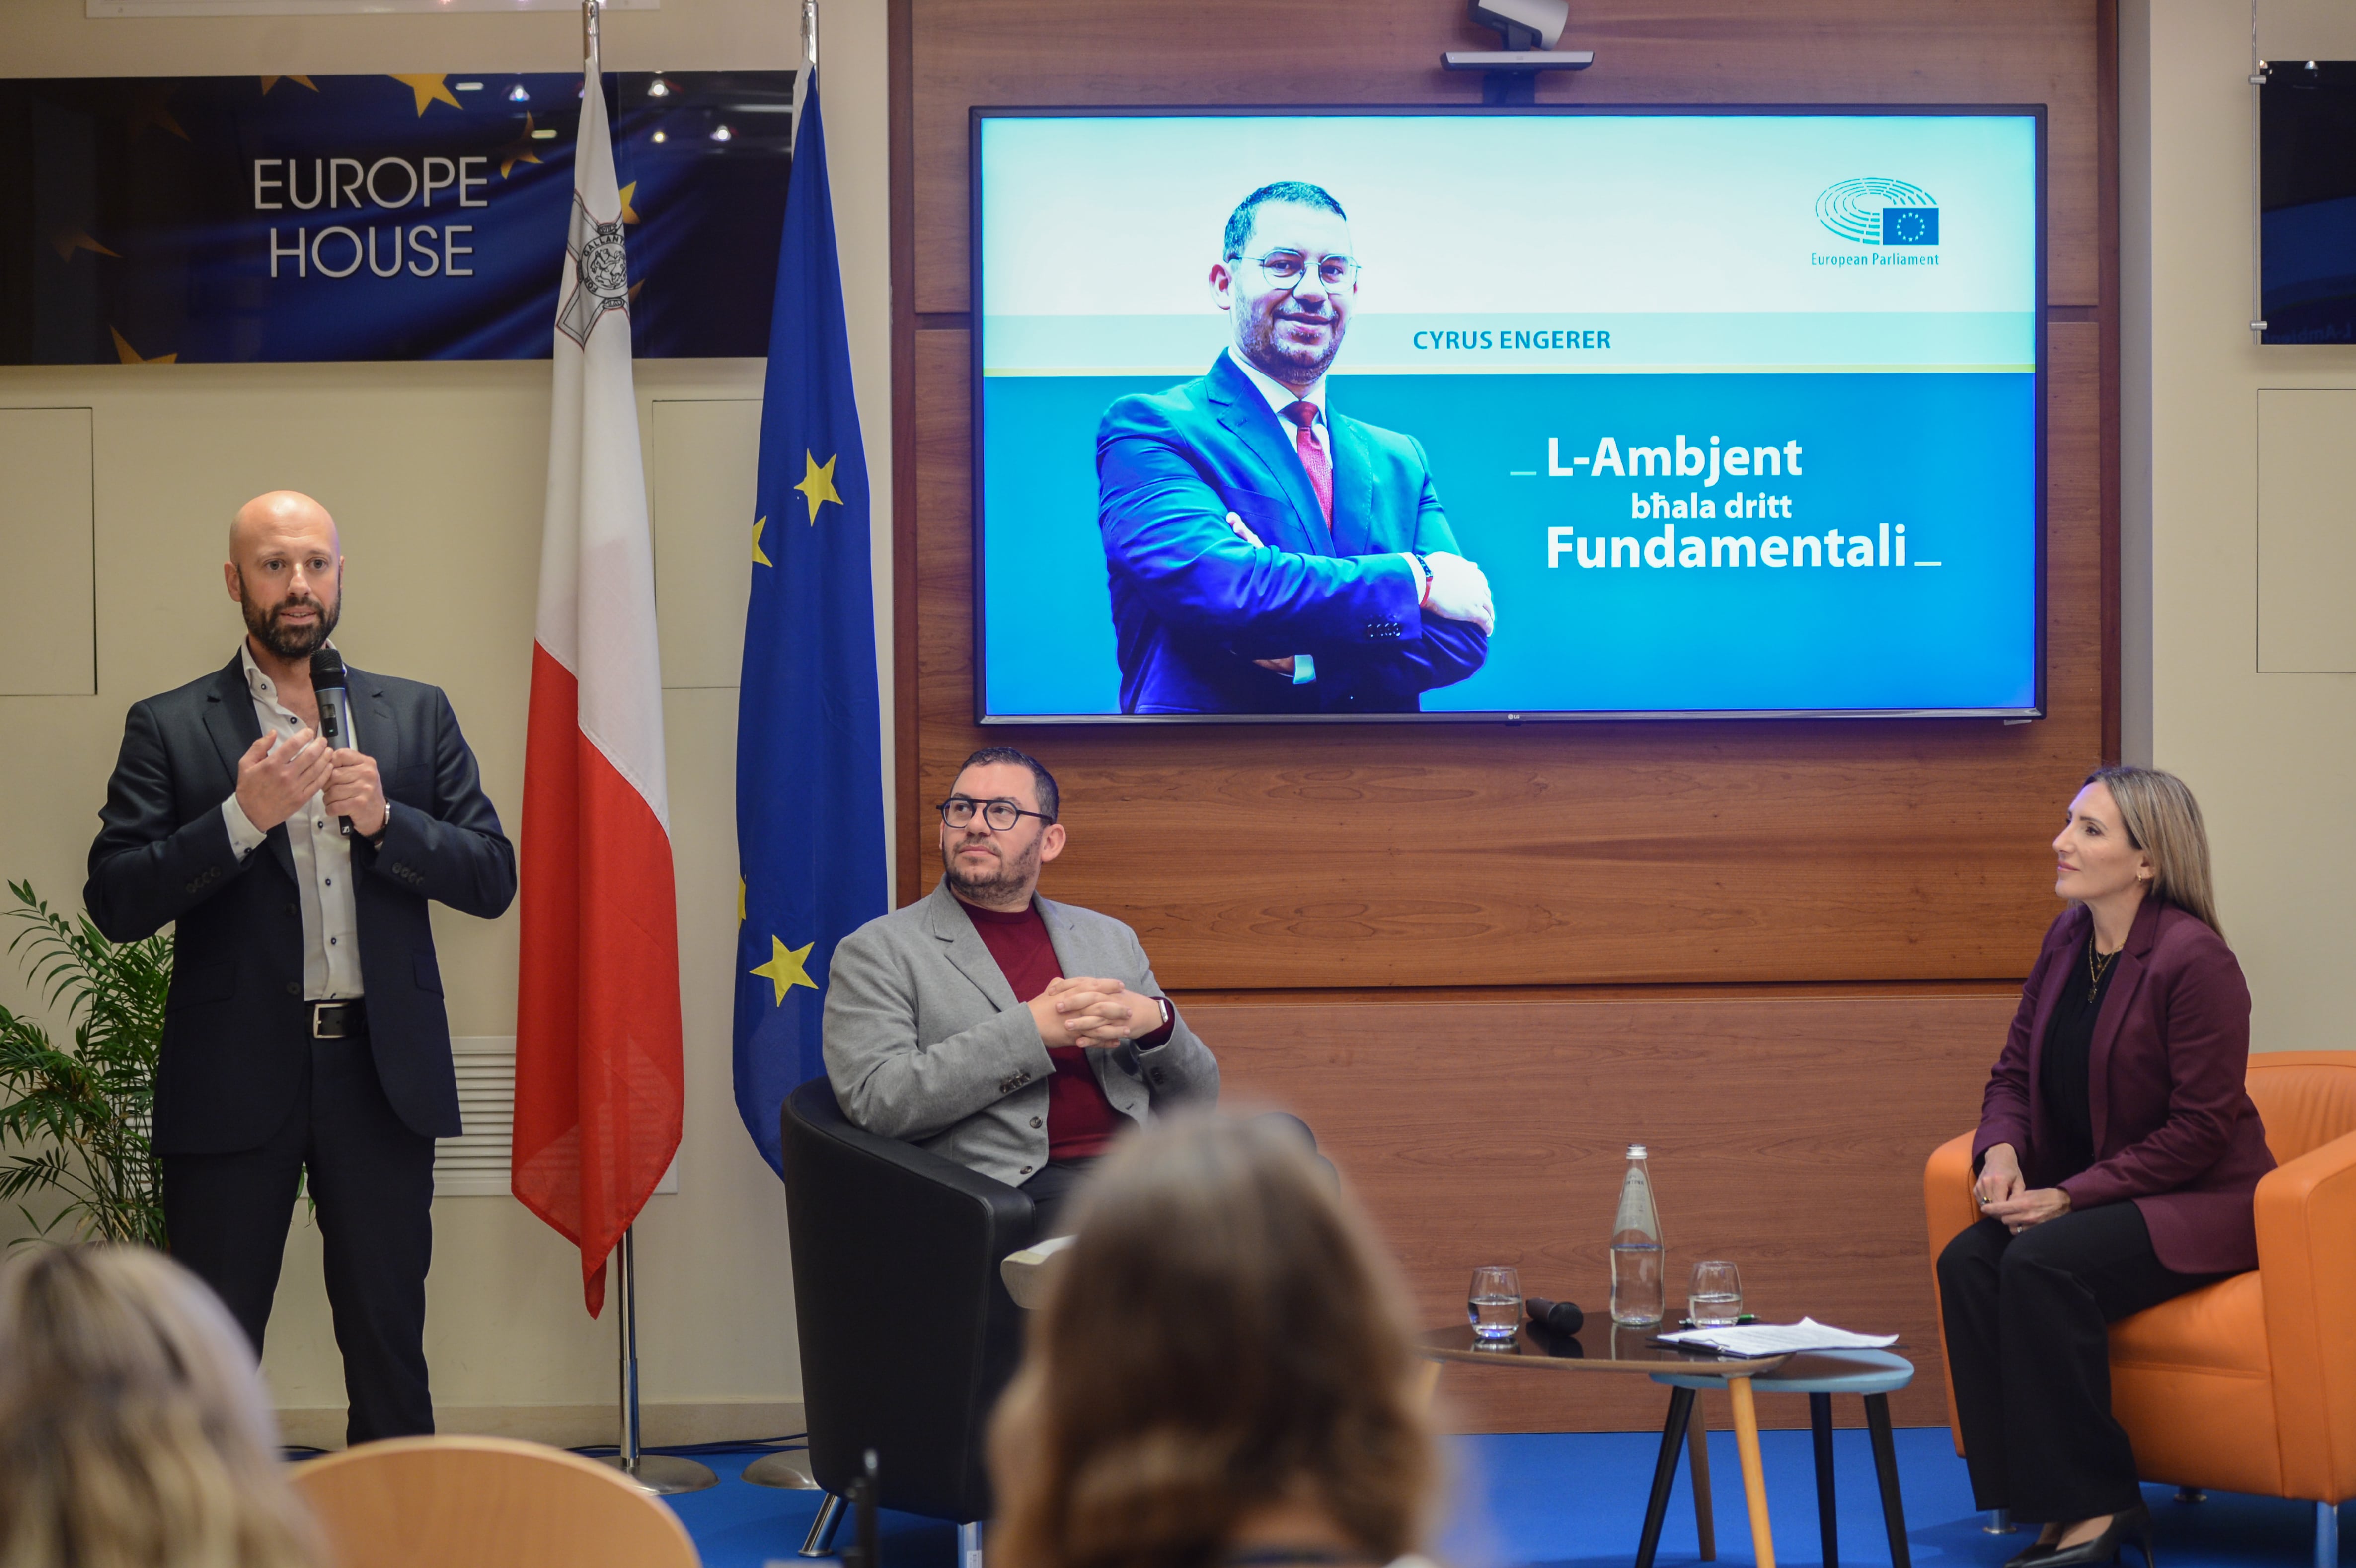 Dr Mario Sammut, head of the European Parliament Liaison Office in Malta, addresses the audience at "The Environment as a Fundamental Human Right" event